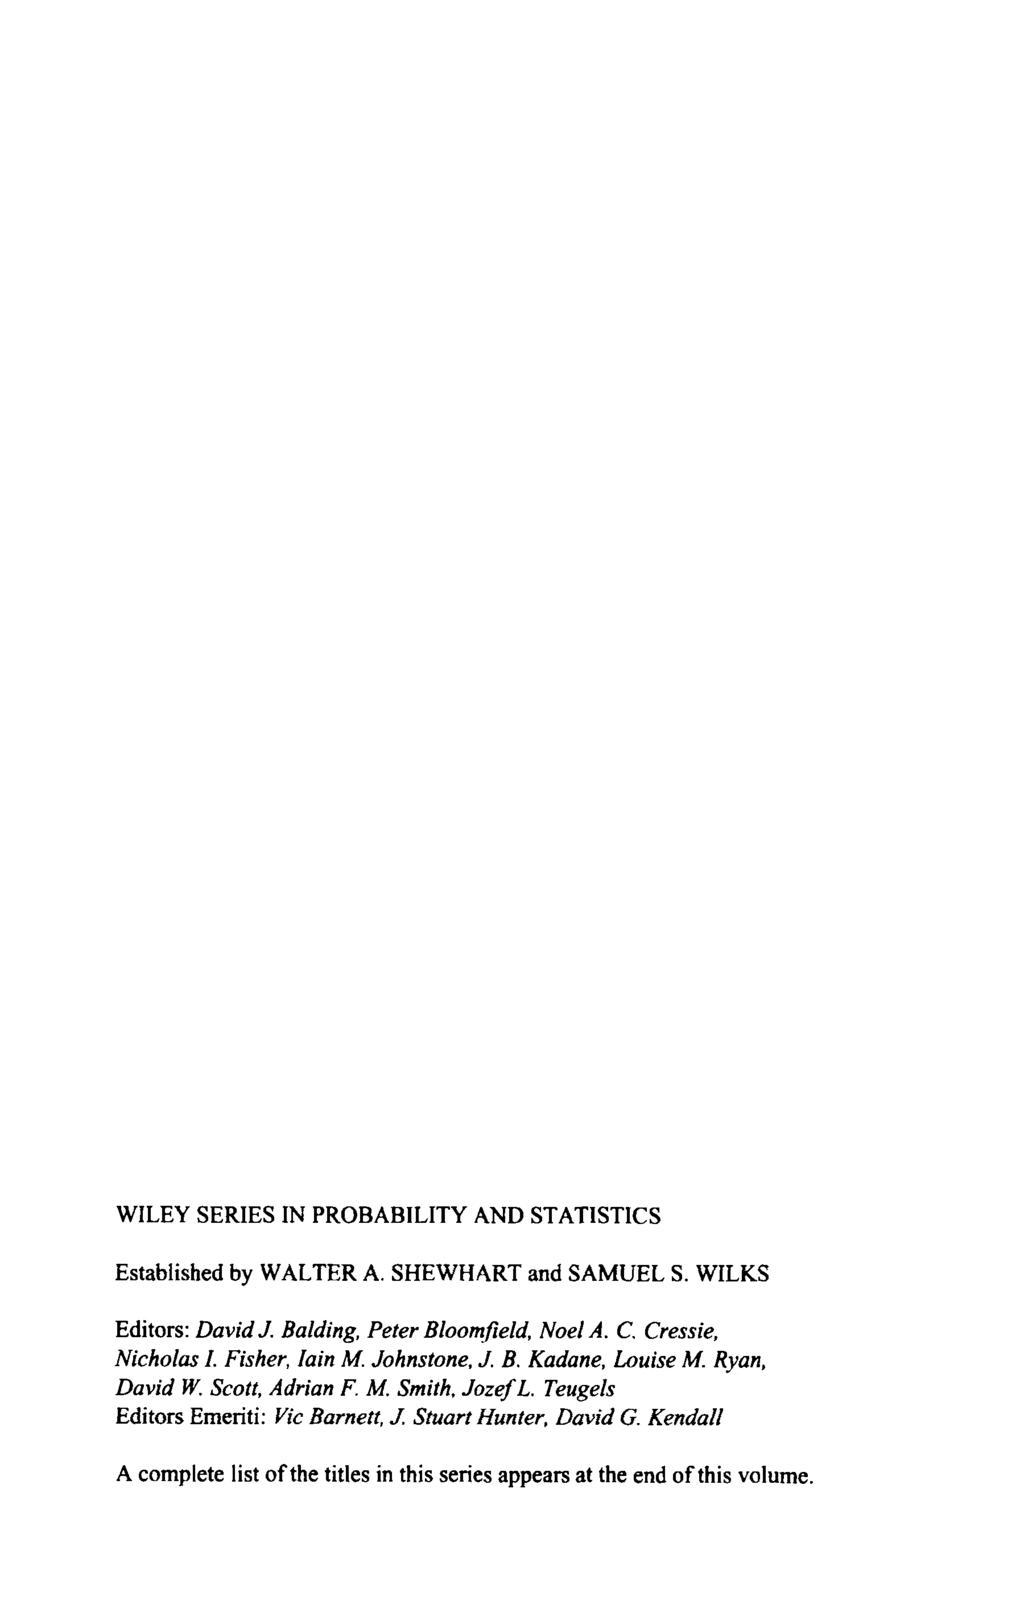 WILEY SERIES IN PROBABILITY AND STATISTICS Established by WALTER A. SHEWHART and SAMUEL S. WILKS Editors: David J. Balding, Peter Bloomfield, Noel A. C. Cressie, Nicholas I. Fisher, Iain M.